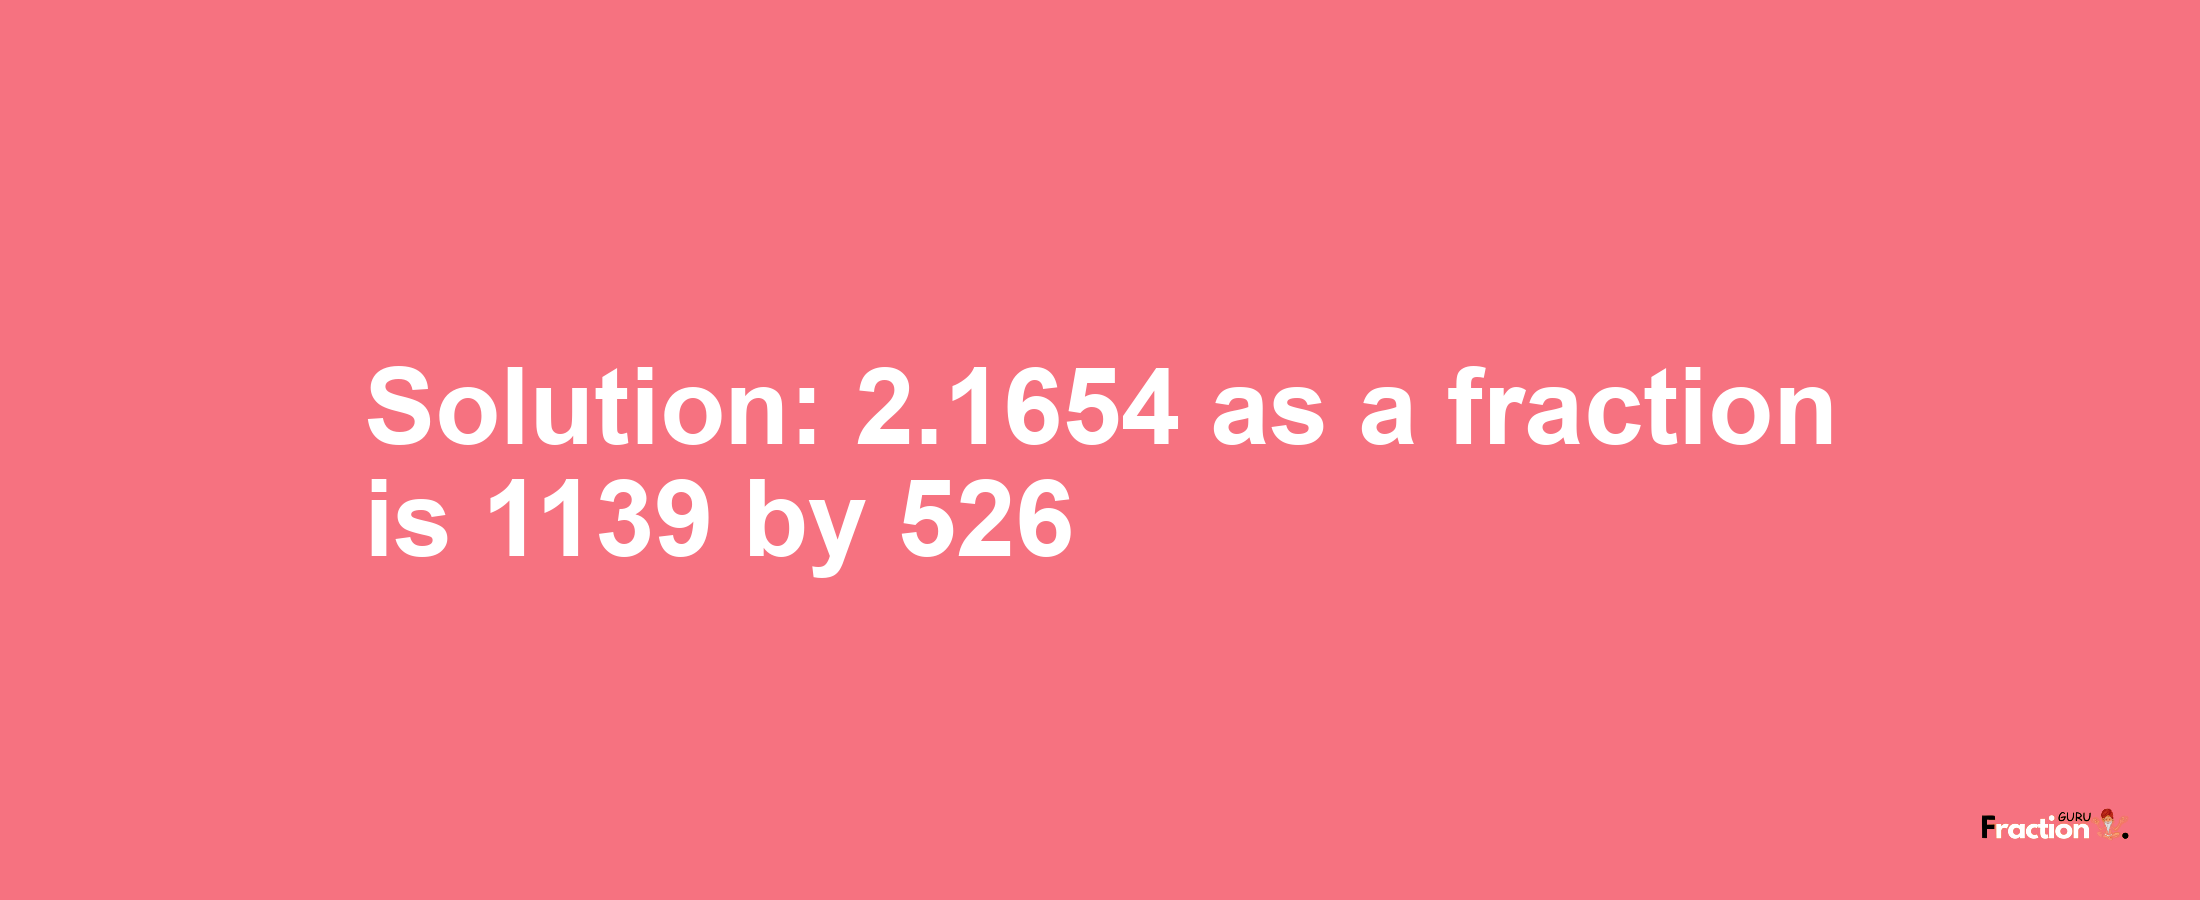 Solution:2.1654 as a fraction is 1139/526